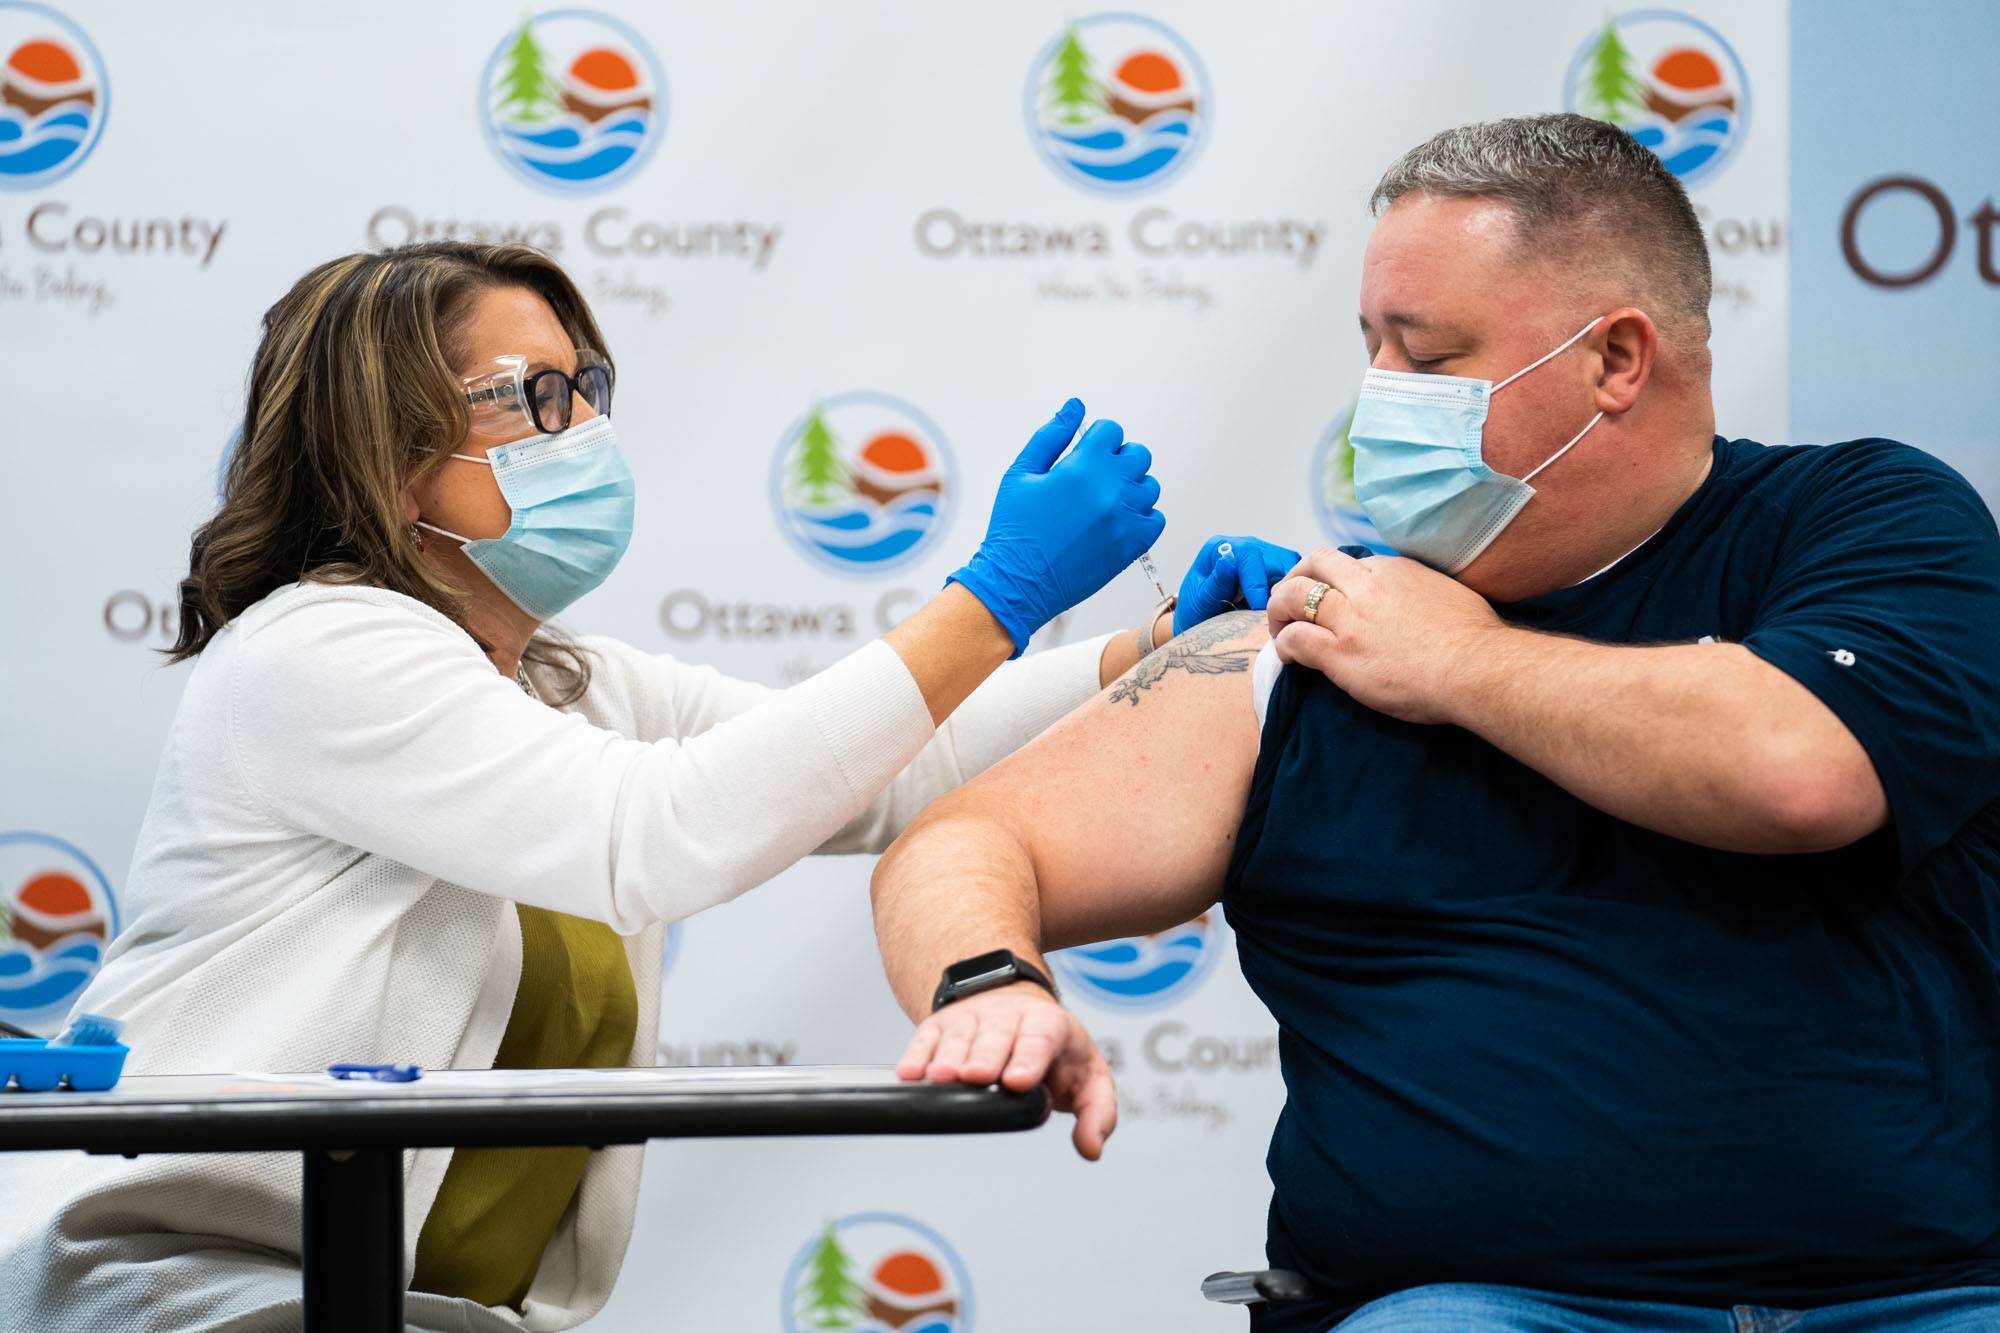 A health department worker gives a COVID-19 vaccine shot to a man with his sleeve rolled up.